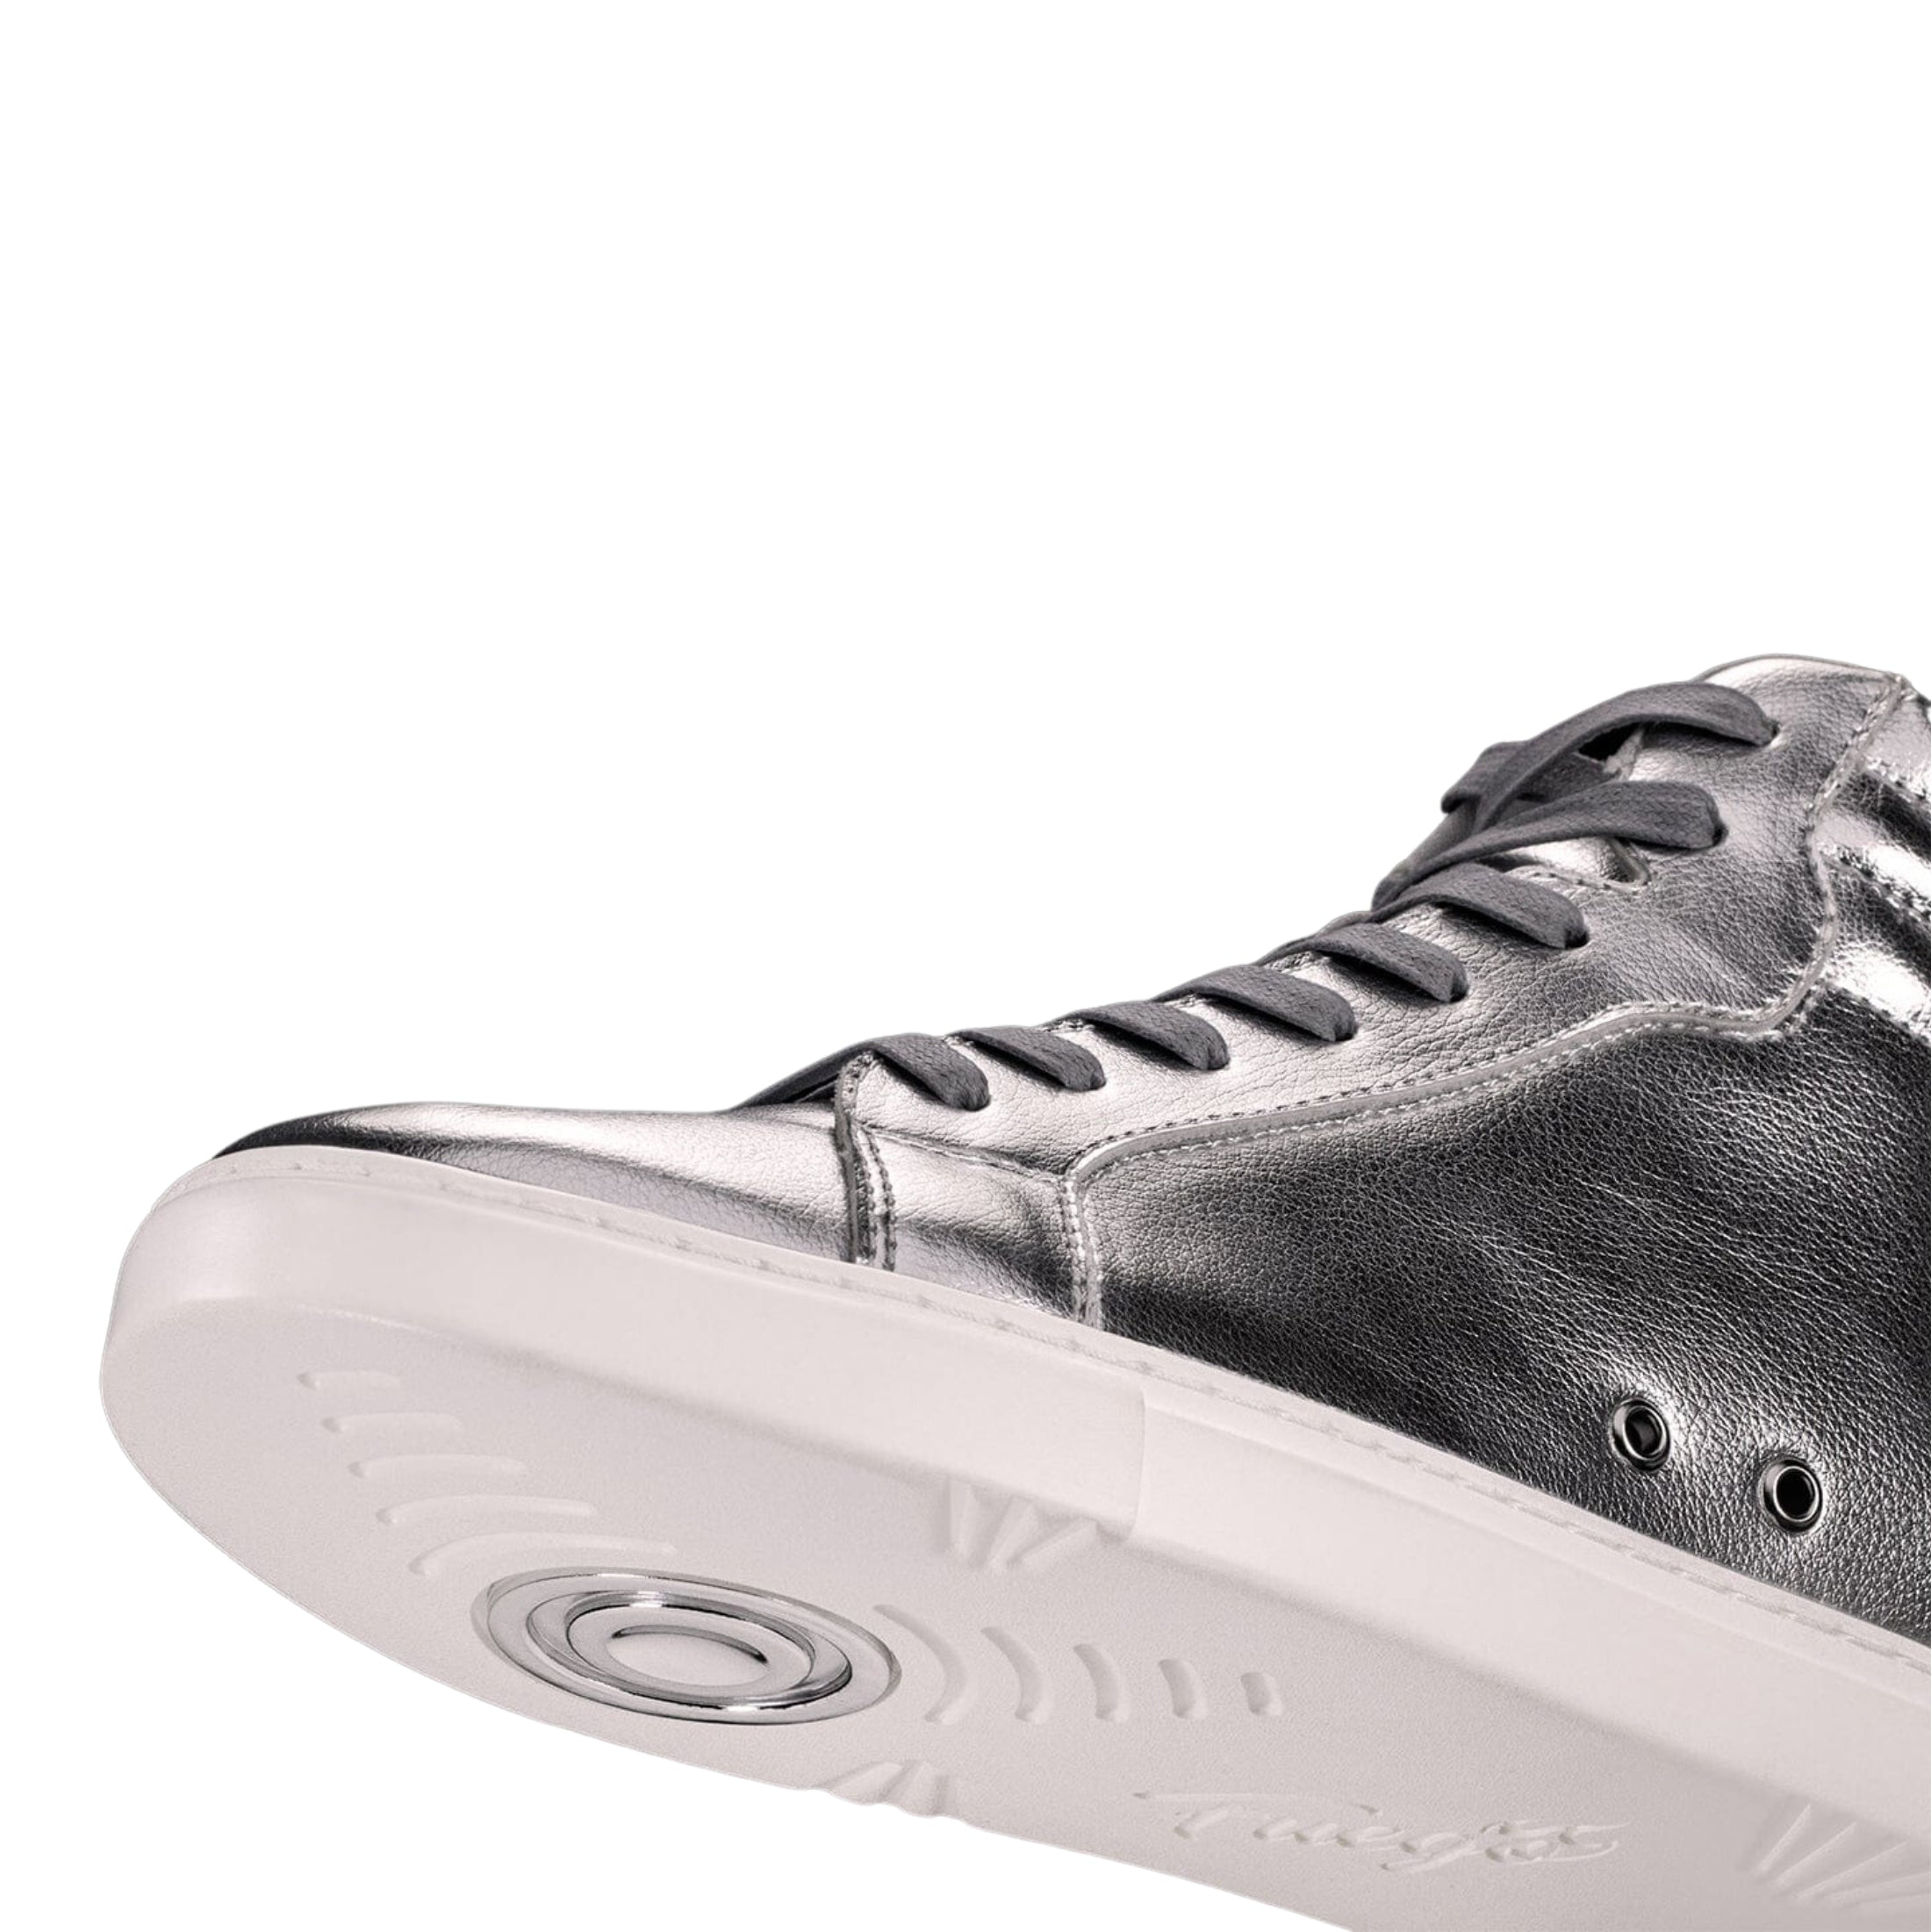 Fuego High Top Dance Sneakers in silver